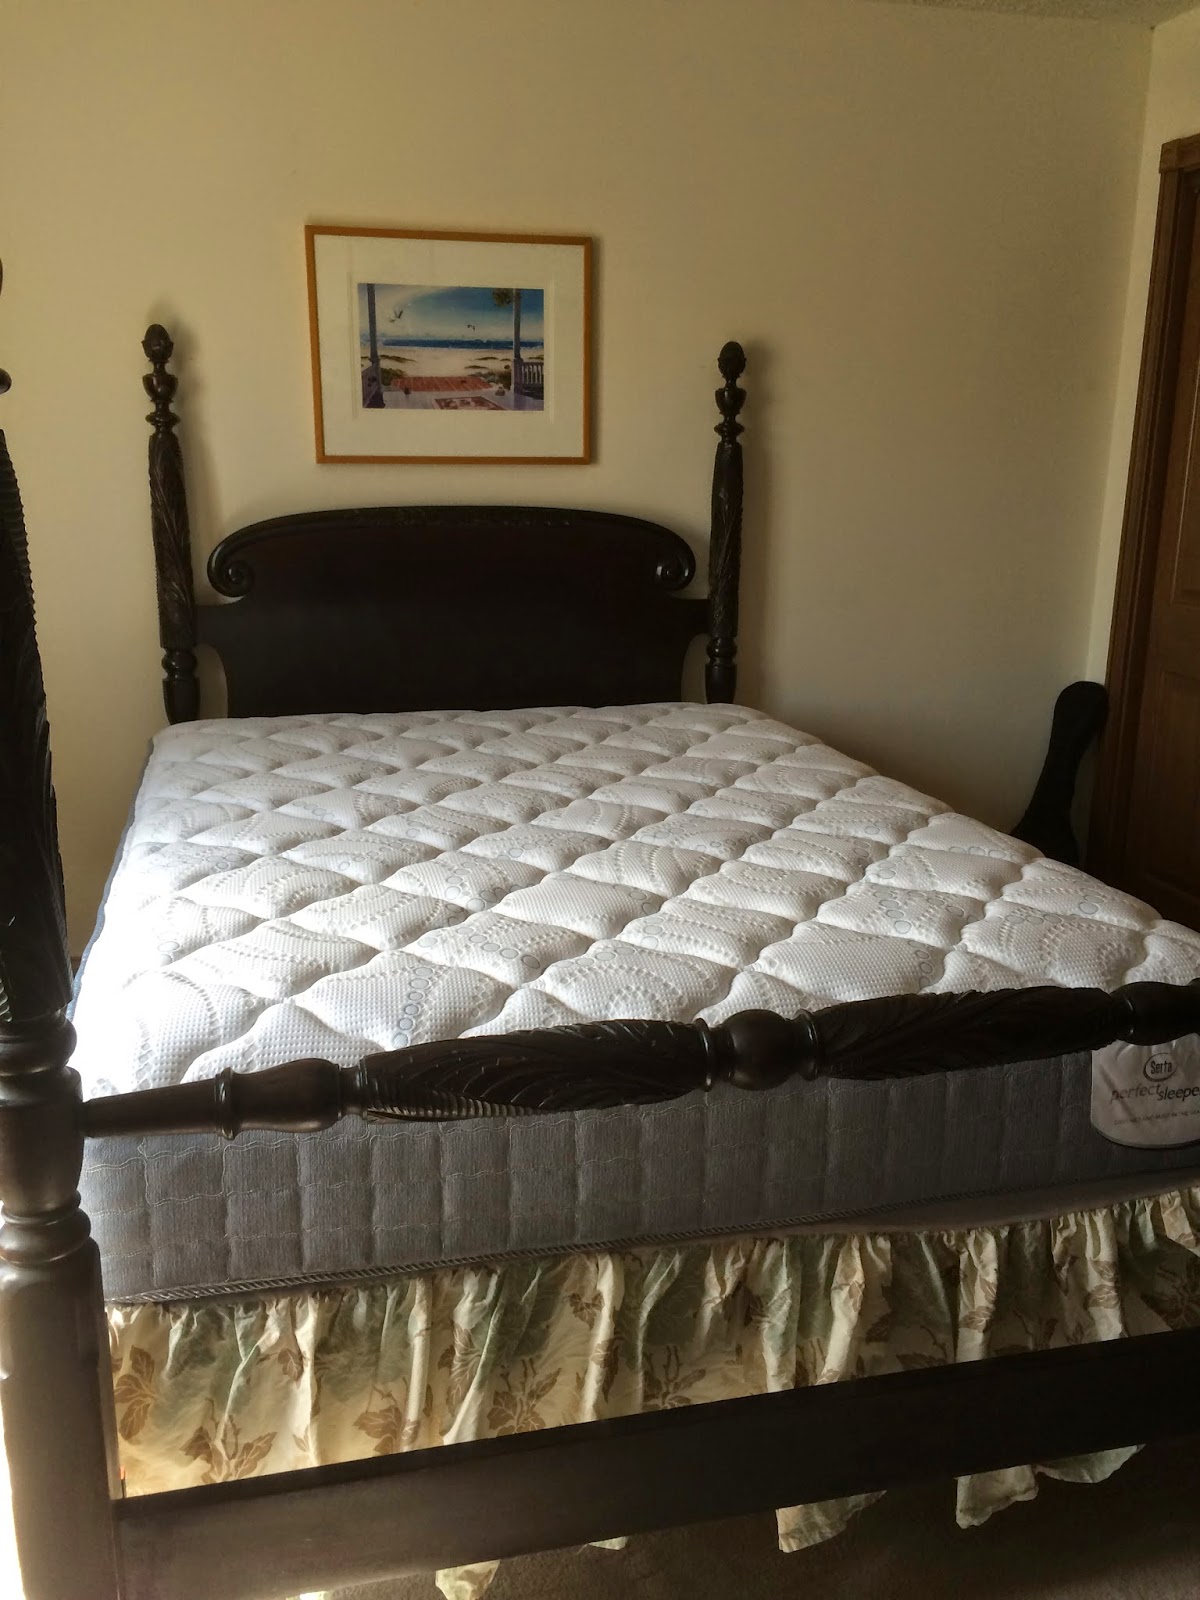 Converting Antique Bed To Queen Mattress, How To Make A Double Bed Frame Into Queen